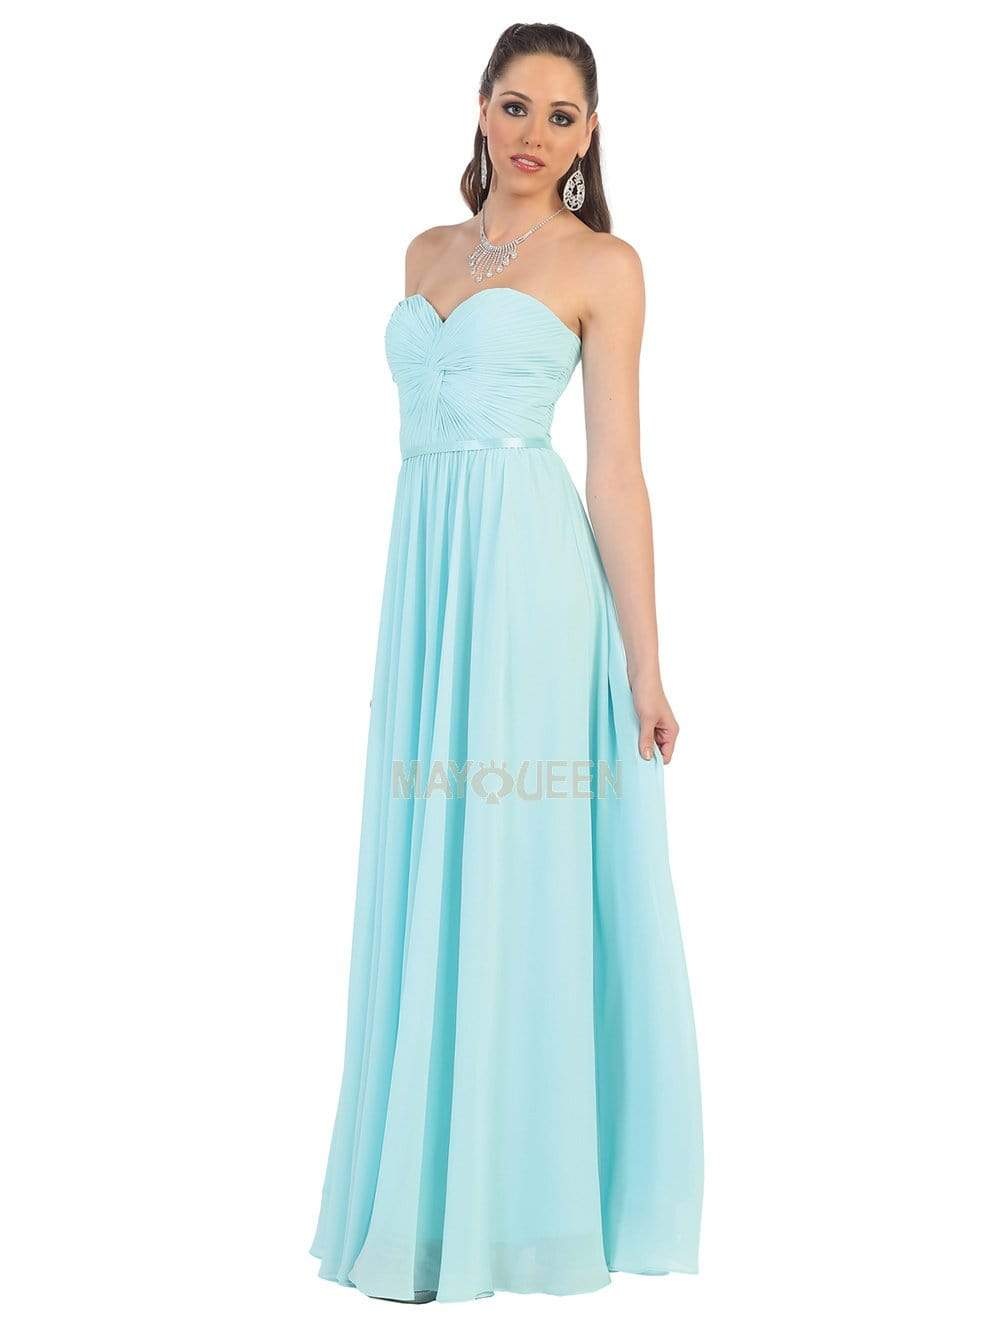 Image of May Queen - MQ1145 Strapless Sweetheart Ruched Bodice A-Line Gown